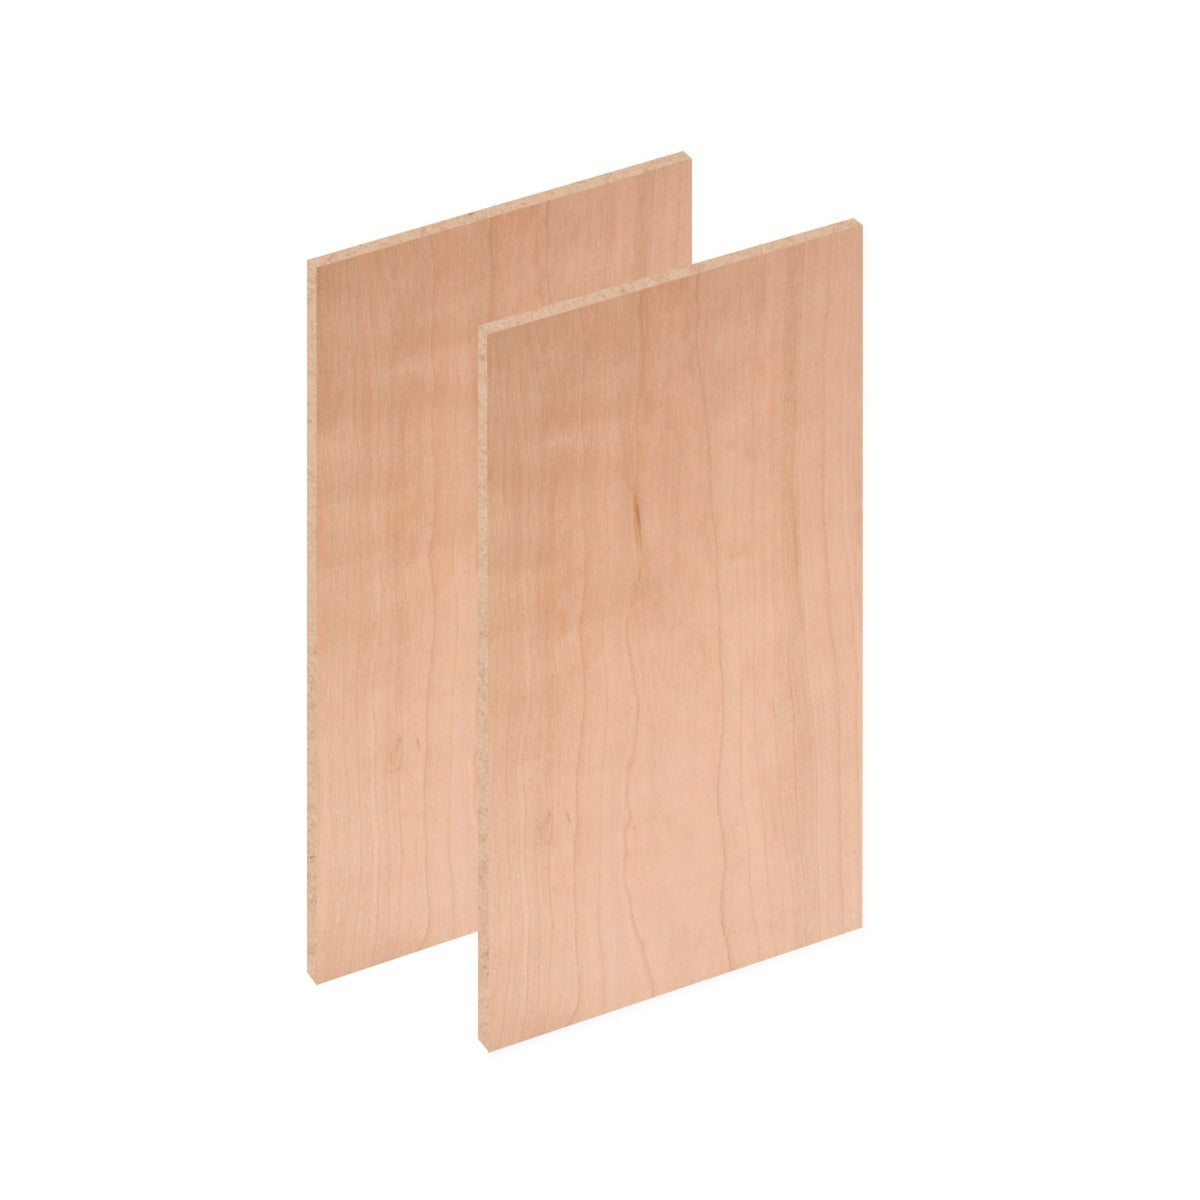 1/8" PLYWOOD SHEETS-Cherry